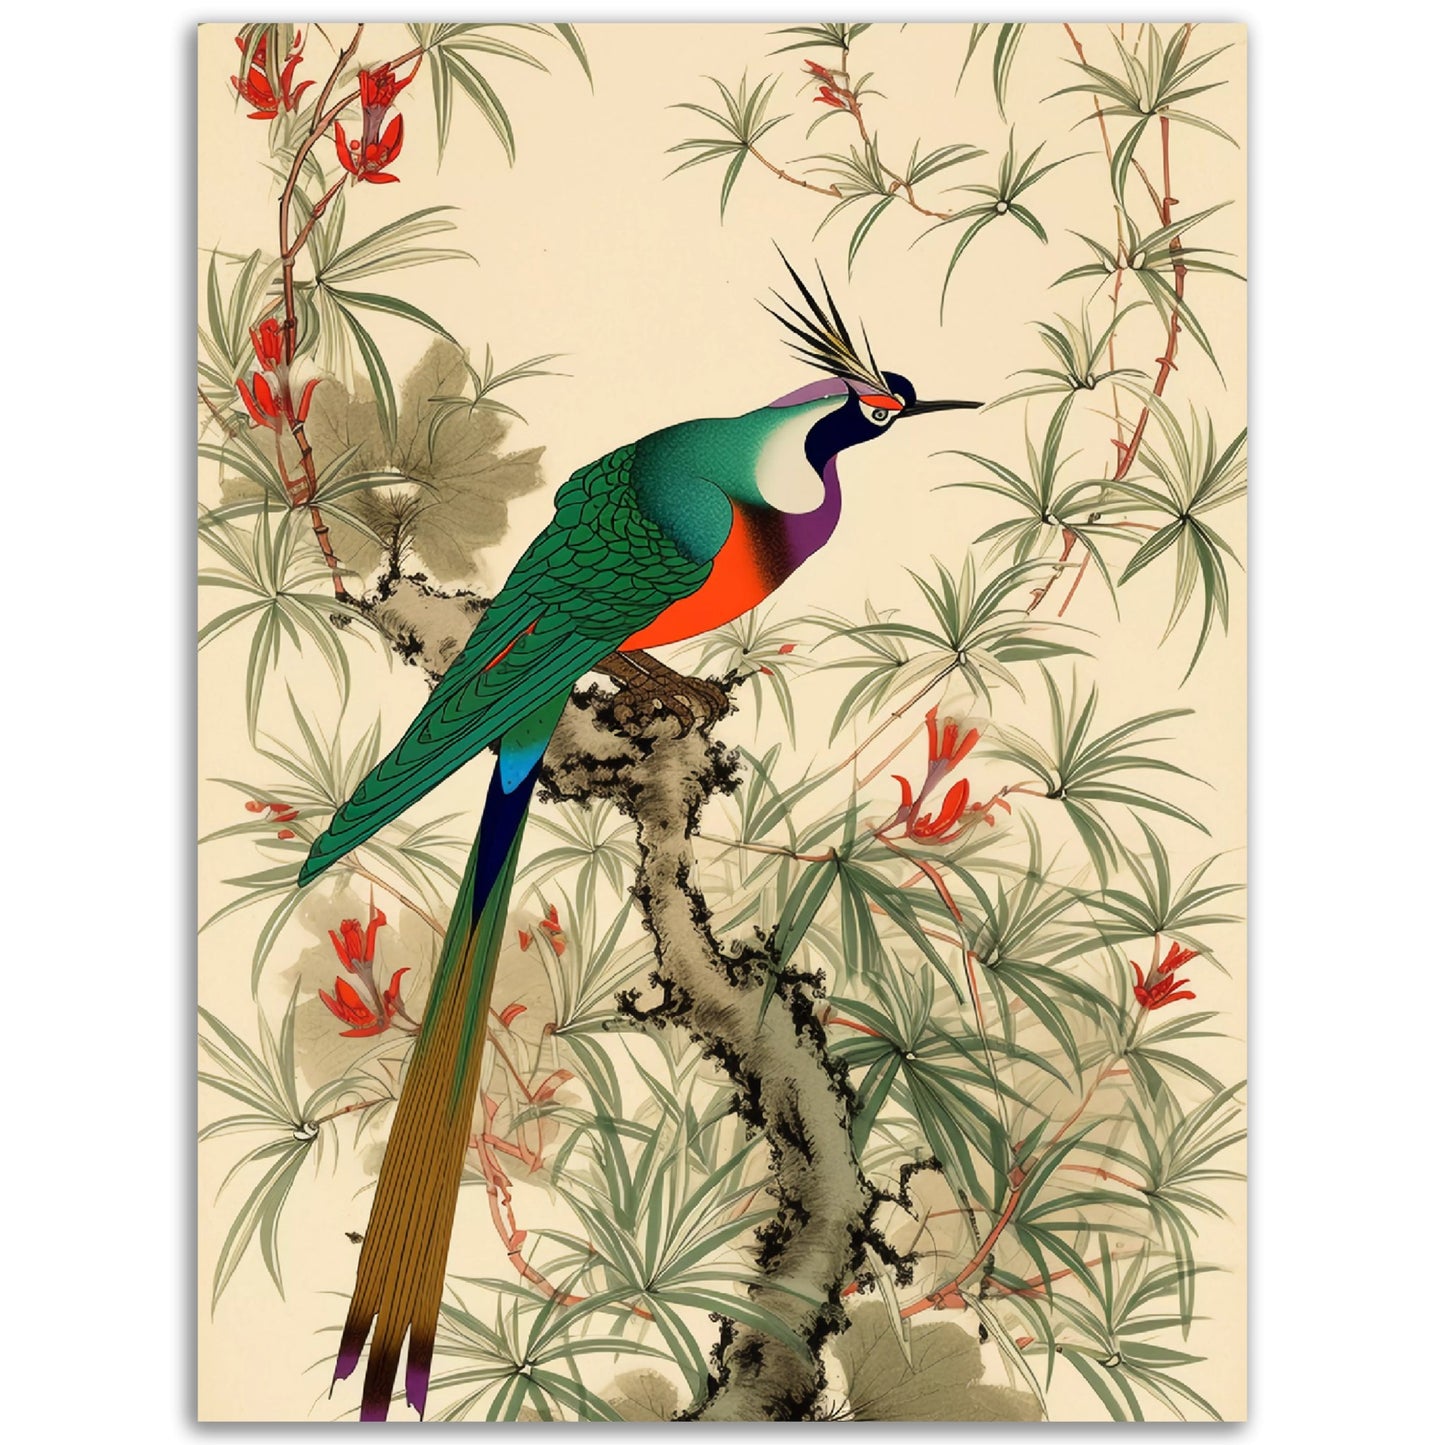 An Asian Longtailed Bird perched on a branch, turned into an eye-catching poster.